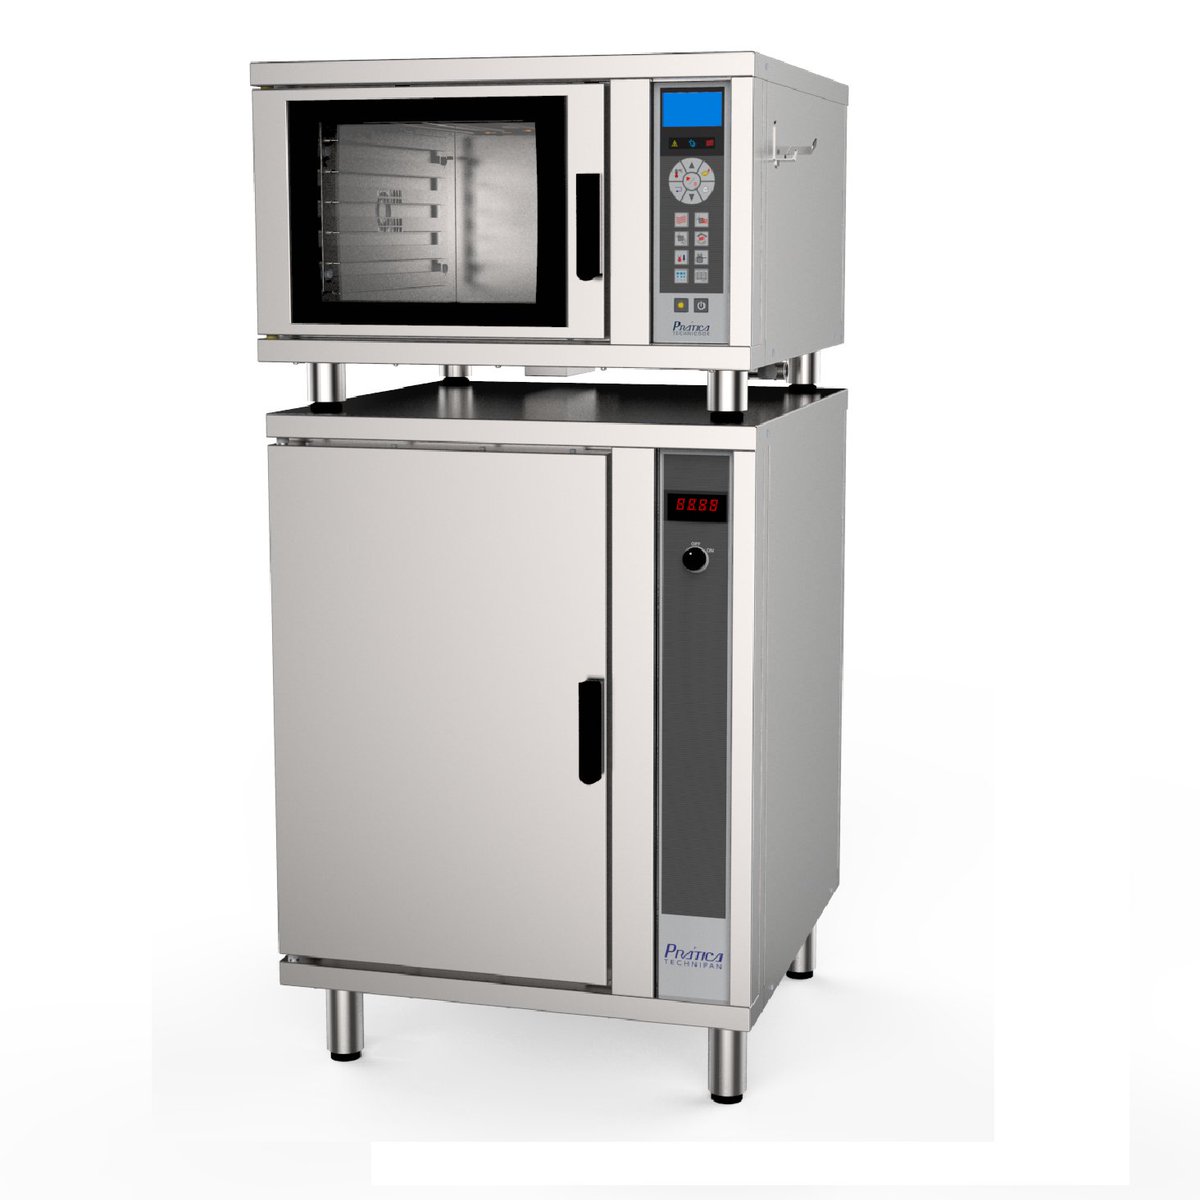 Lease a Pratica EC3 combi oven for £2.46 per day goo.gl/qwstPp #rational #combinationoven #steamcooking sales@taylor-company.co.uk